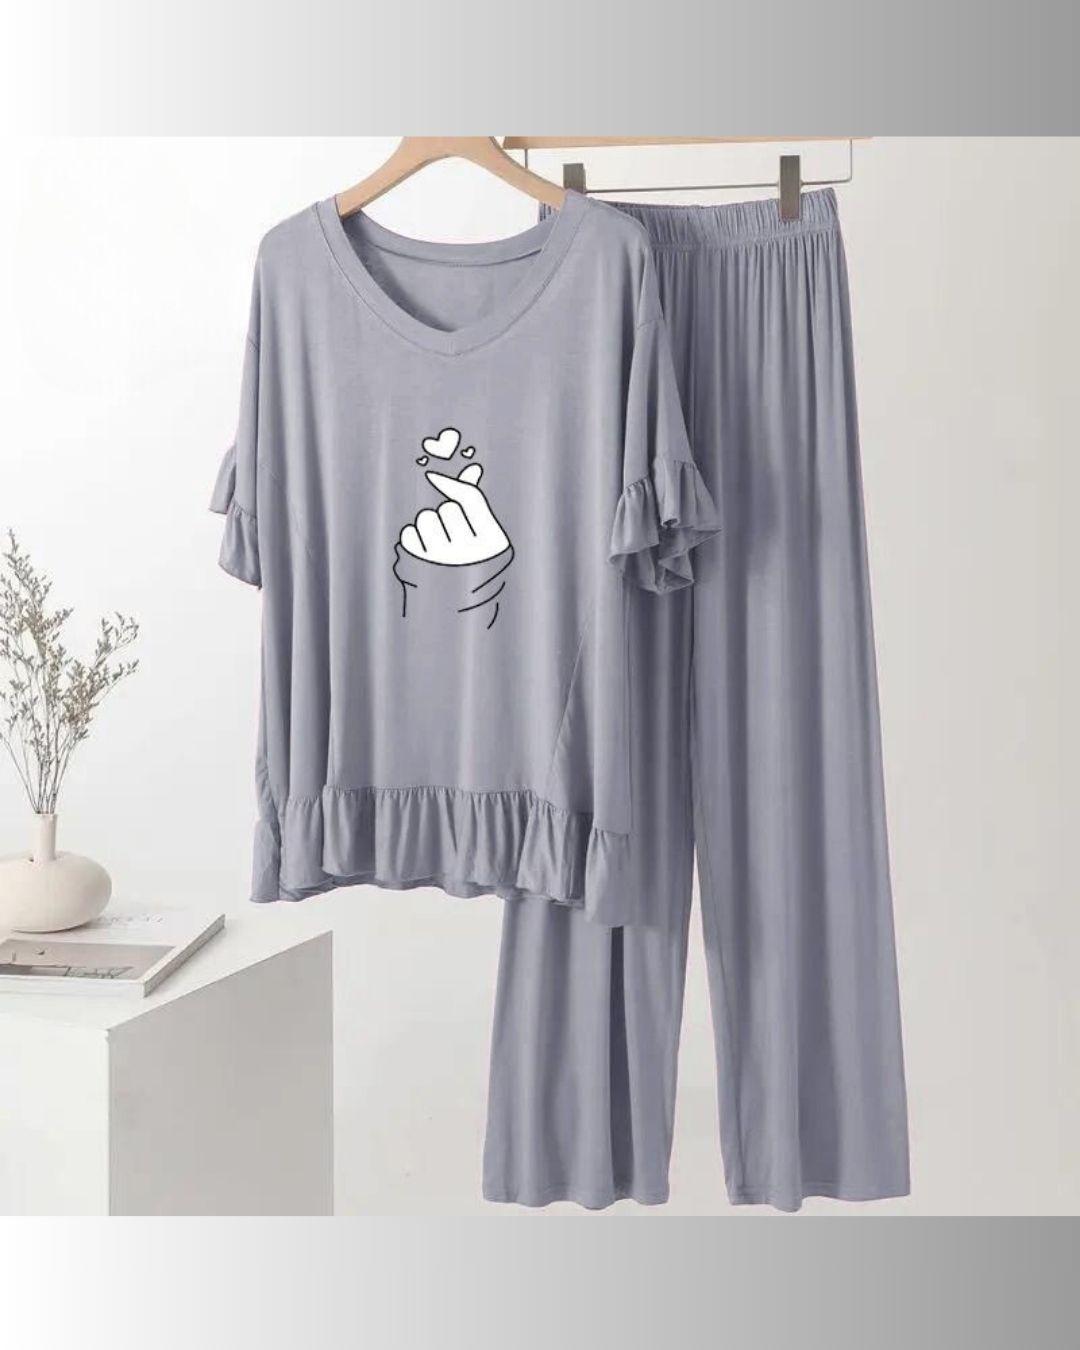 Casual Printed Butterfly Pajama and Shirt Night Suit GREY color